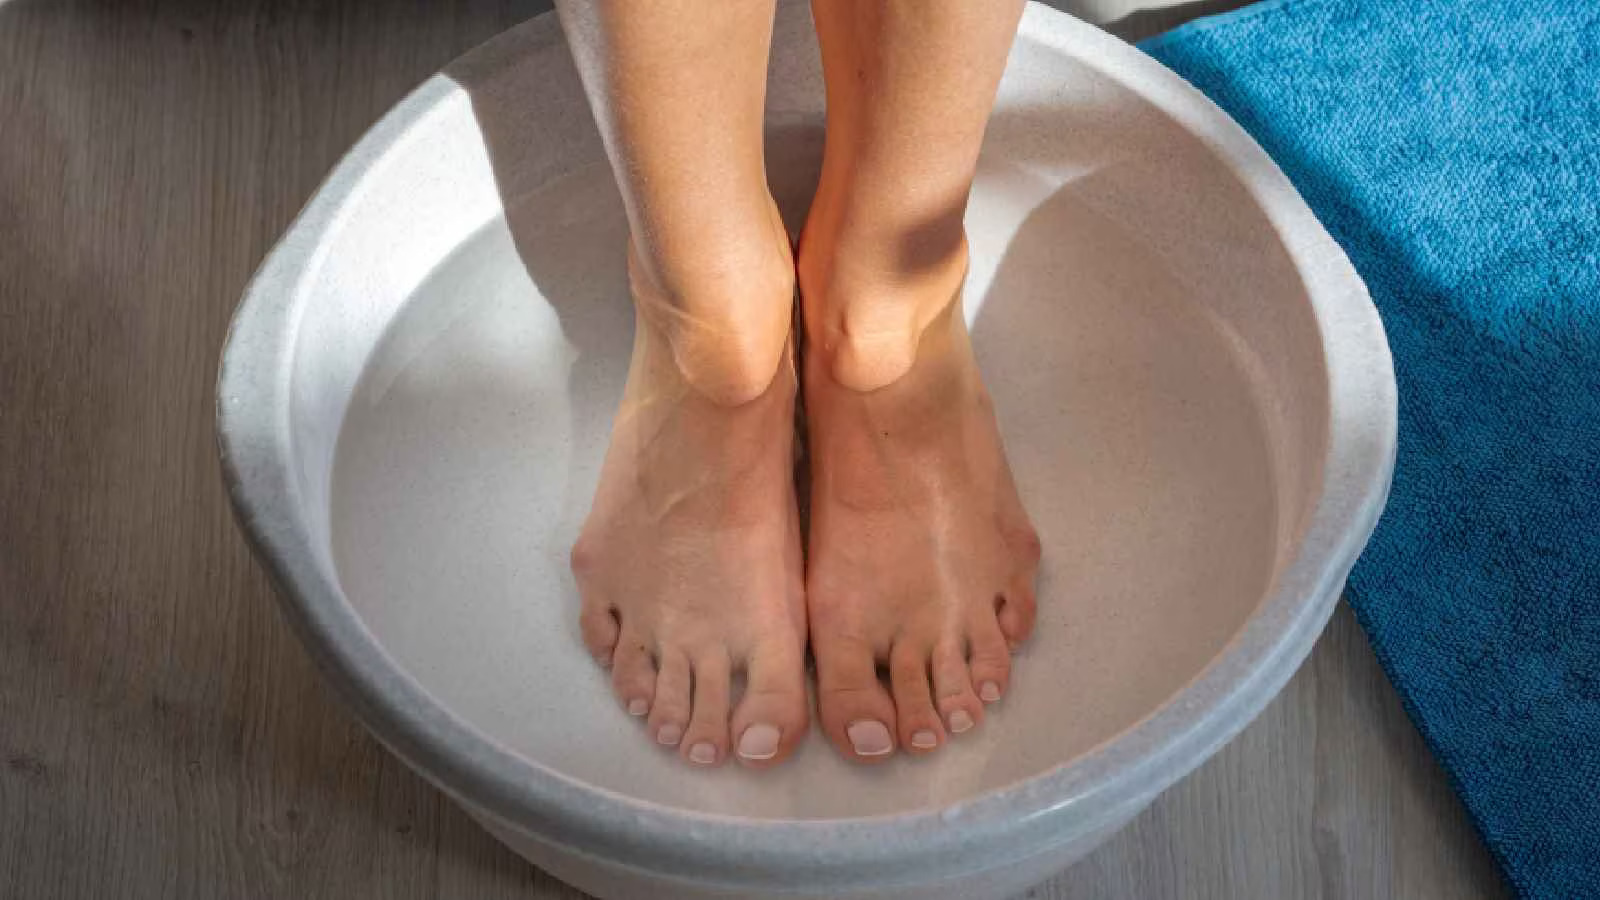 A woman's feet soaked in water